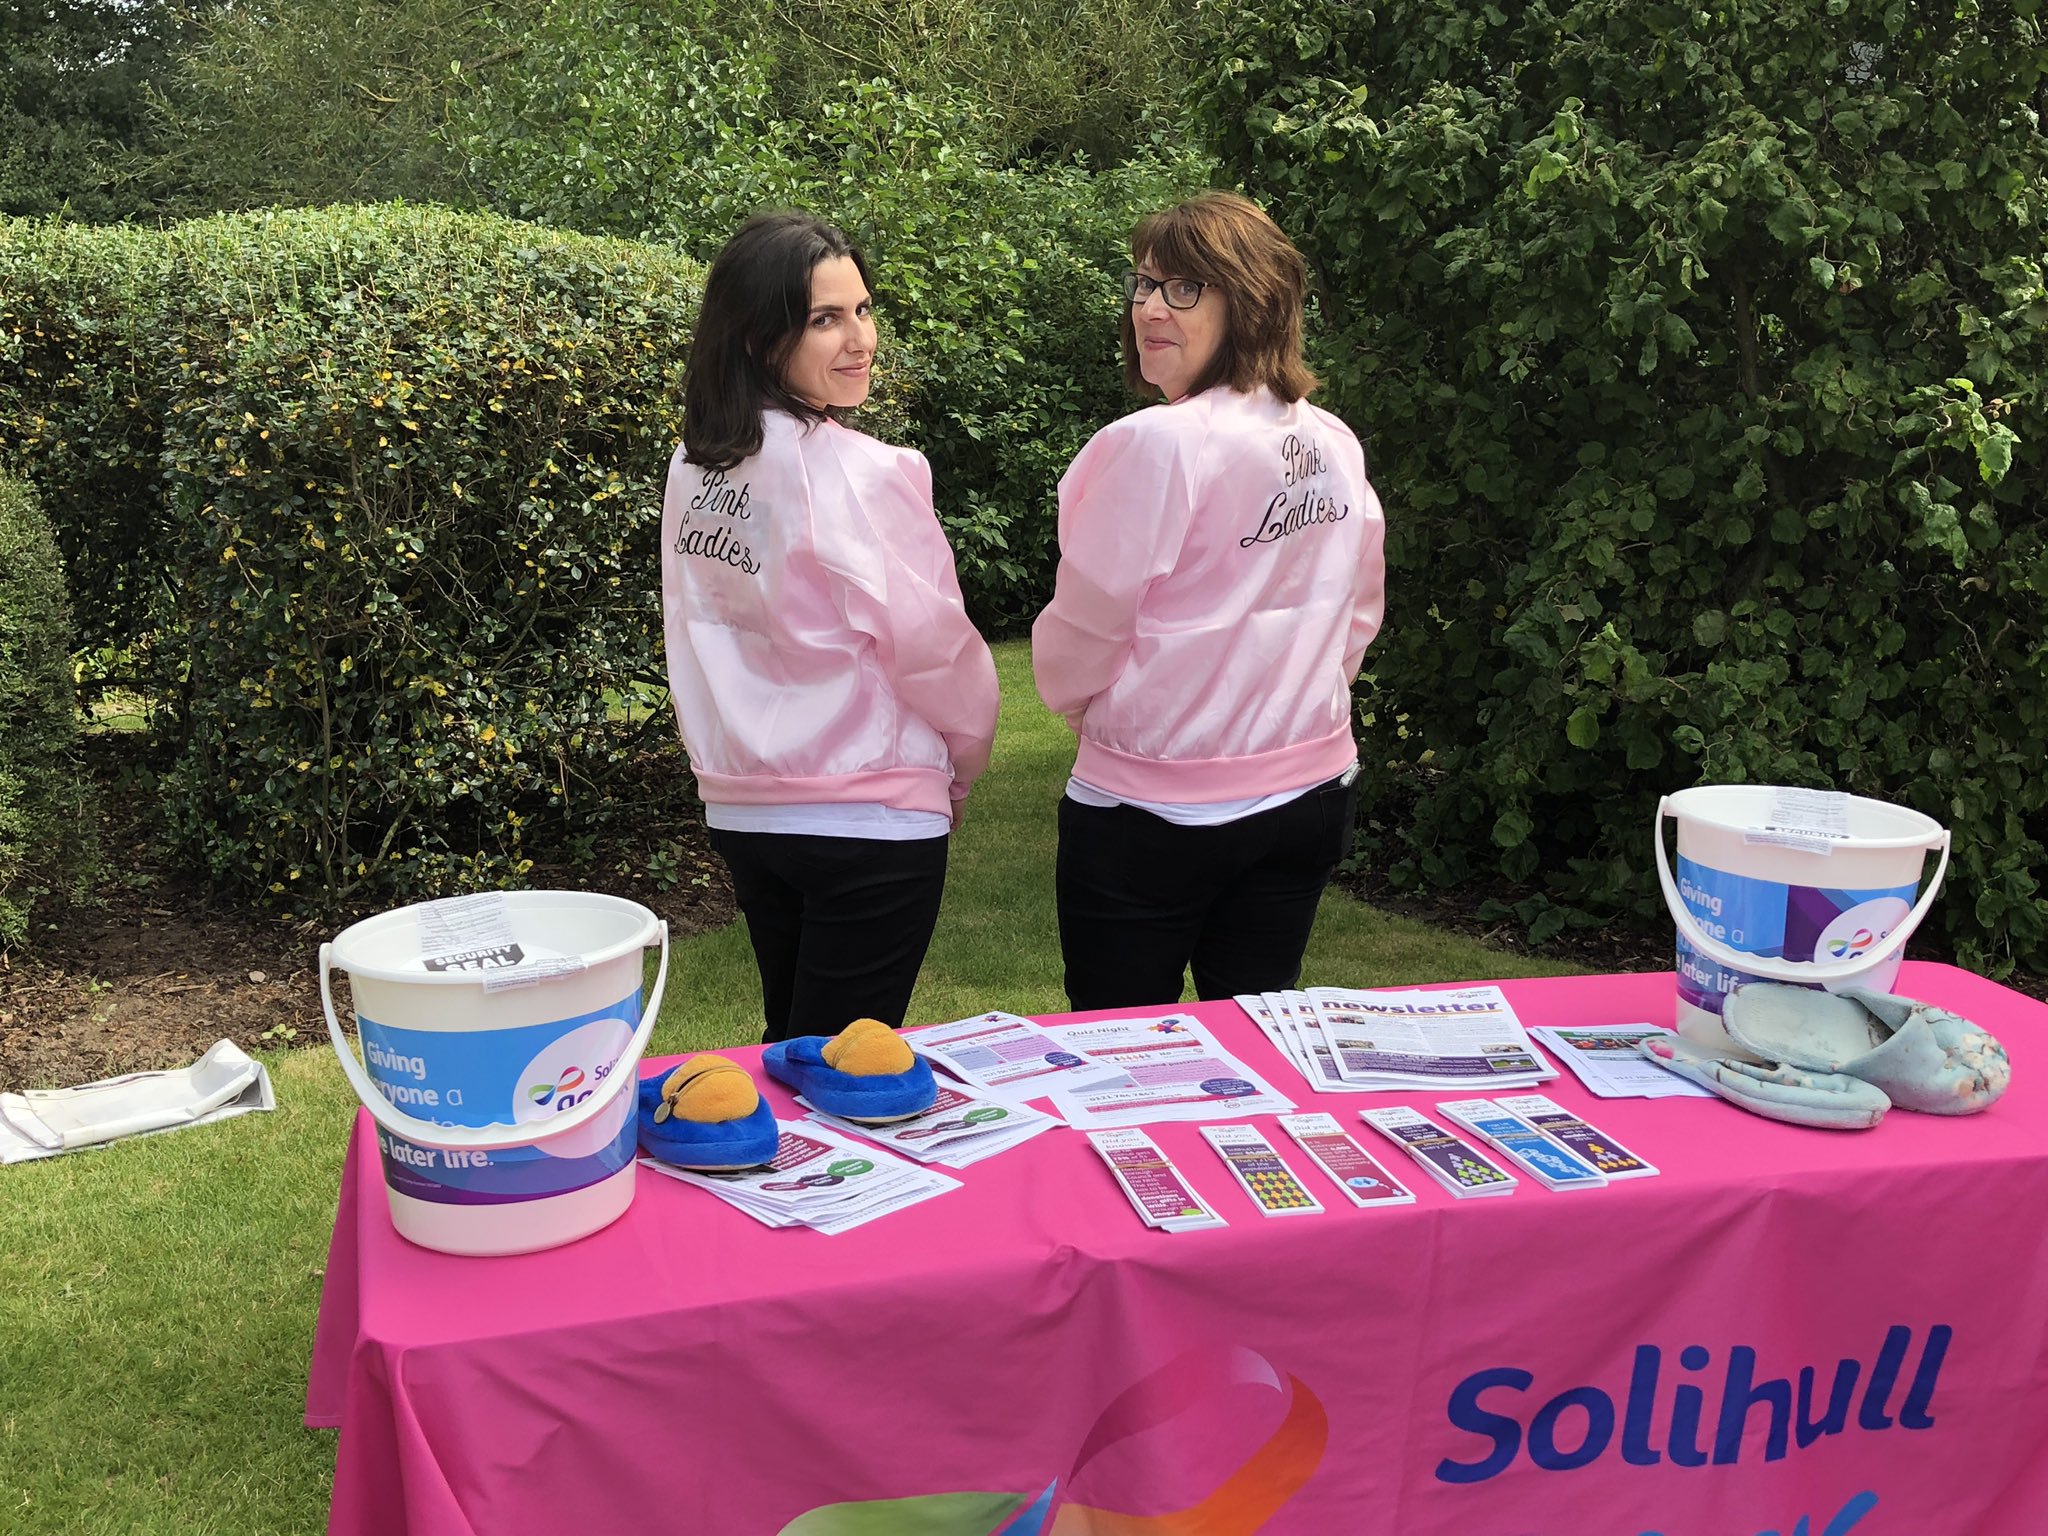 Two female presenting people wearing pink jackets, standing at a table covered in a pink table cloth displaying Age UK Solihull marketing materials